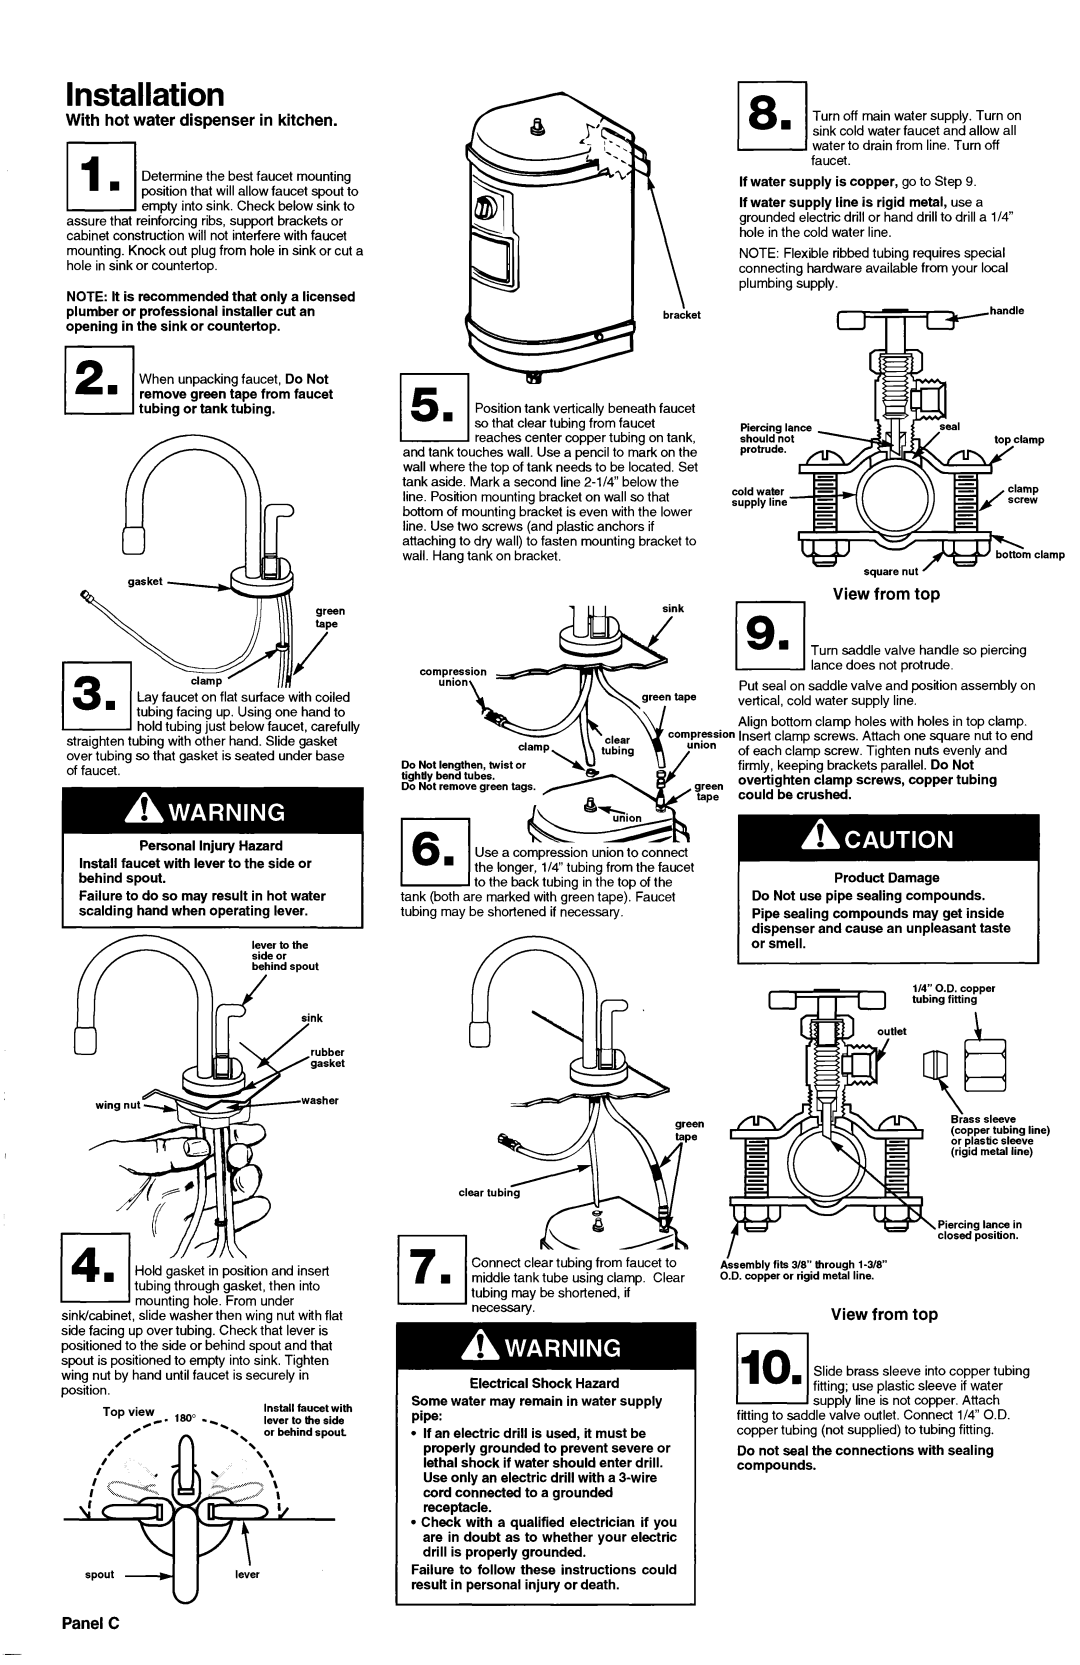 KitchenAid 3184330 installation instructions Installation, With hot water dispenser in kitchen, View from top I, Panel C 